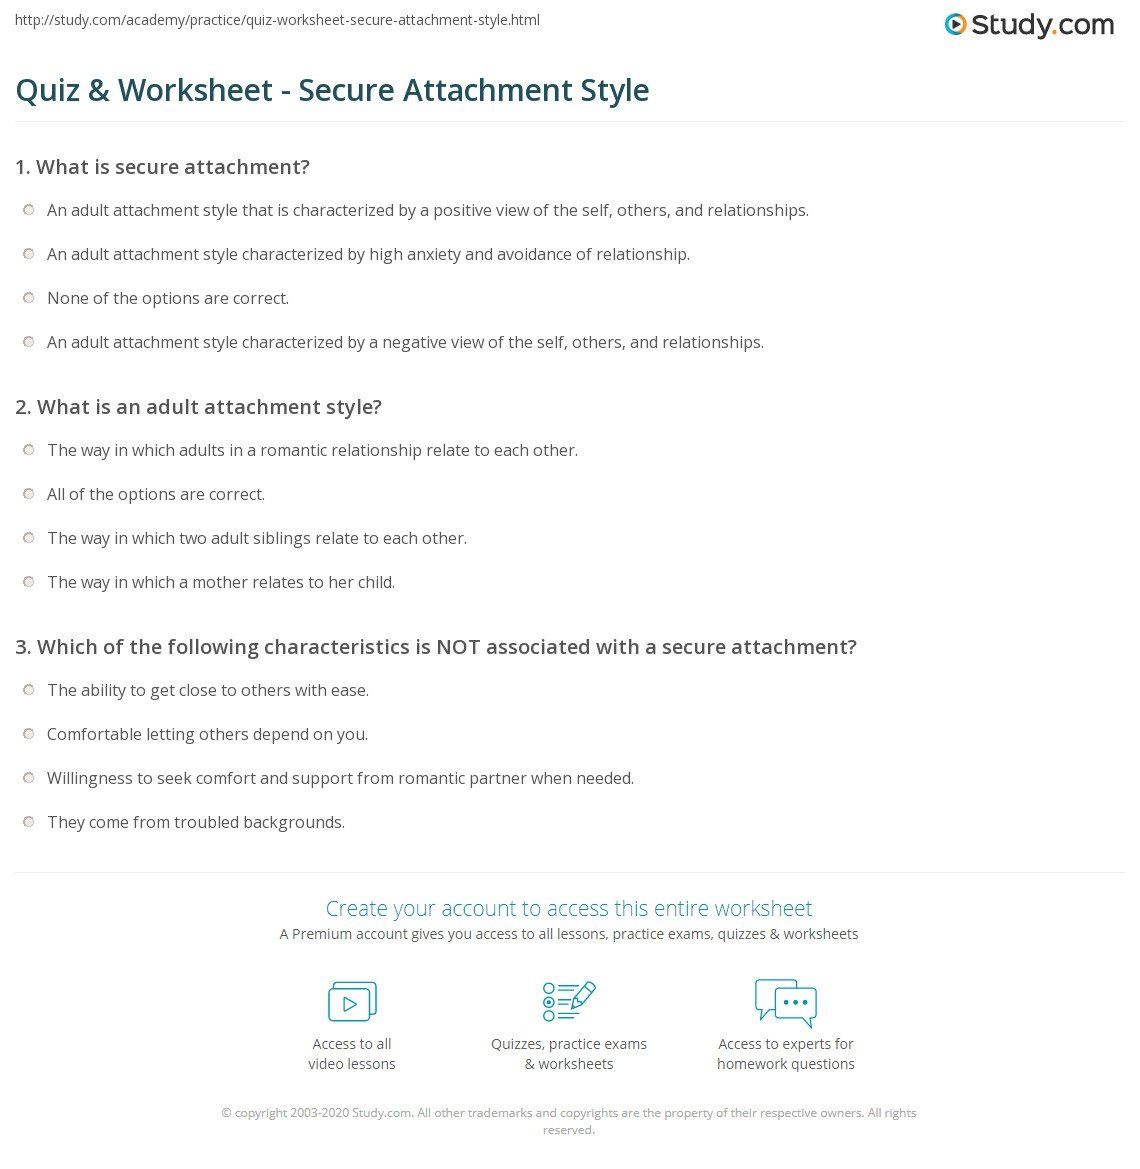 Adult attachment style quiz